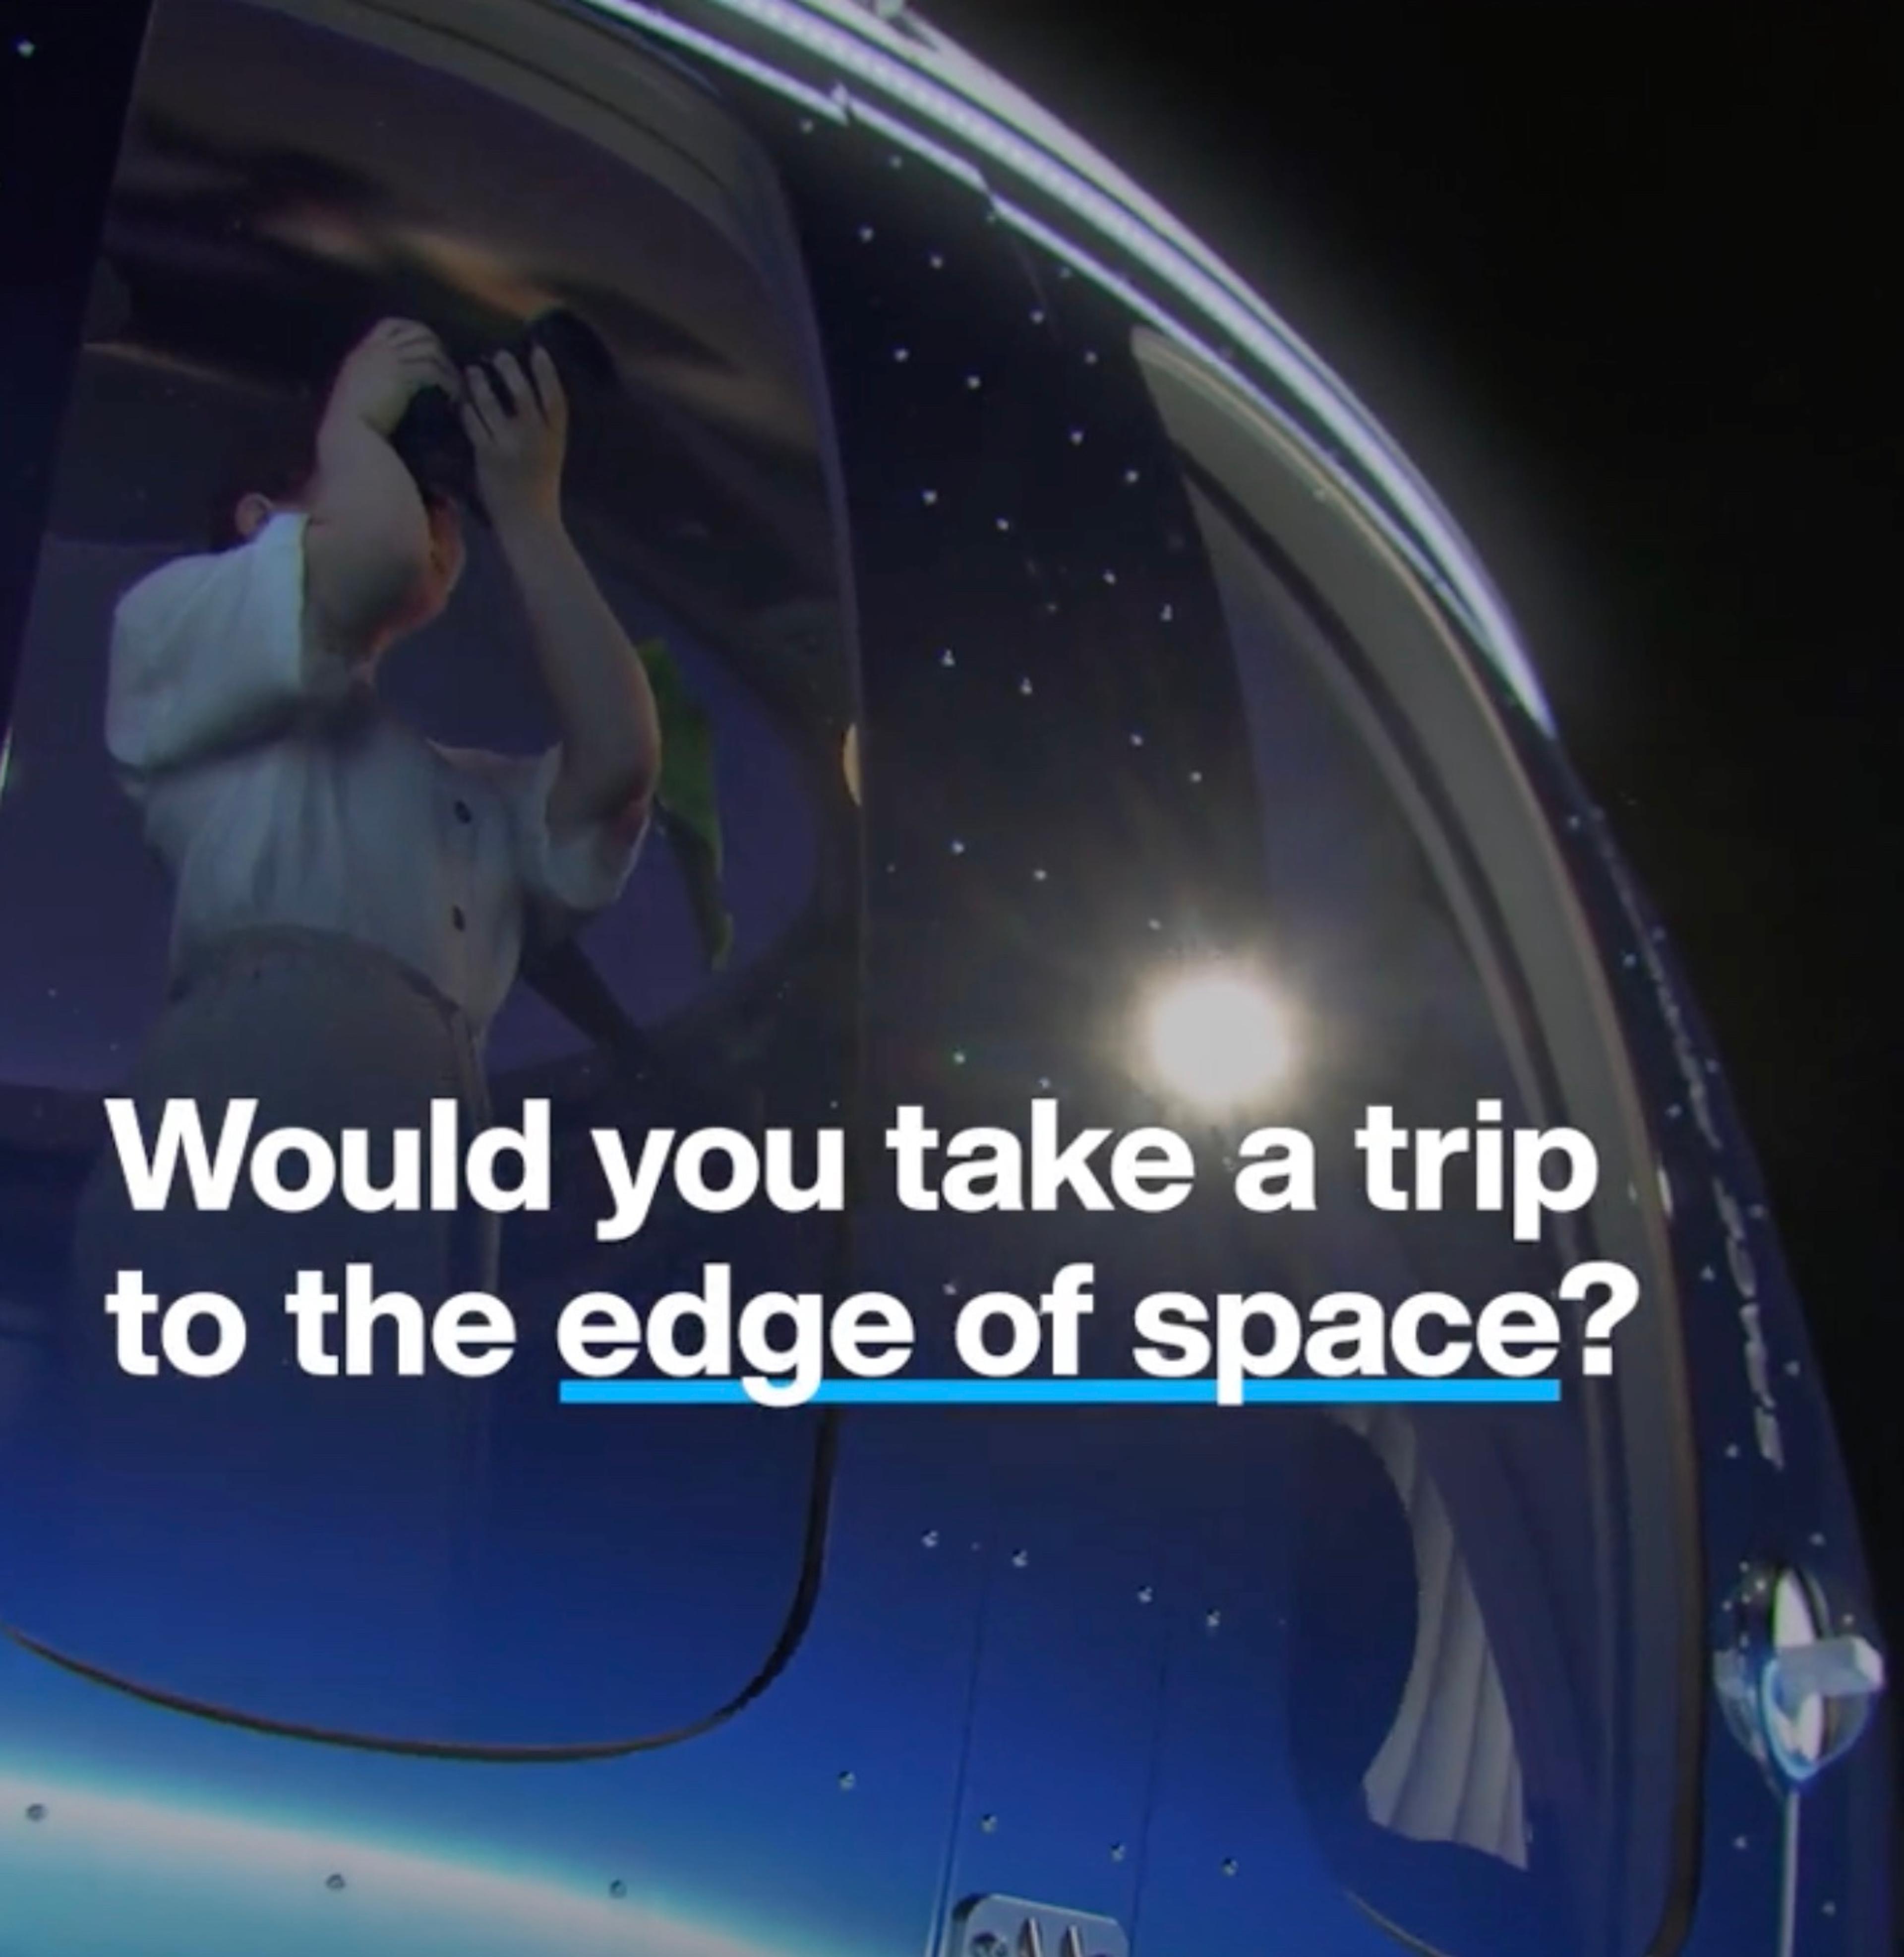 World Economic Forum Highlights Space Perspective with Explainer